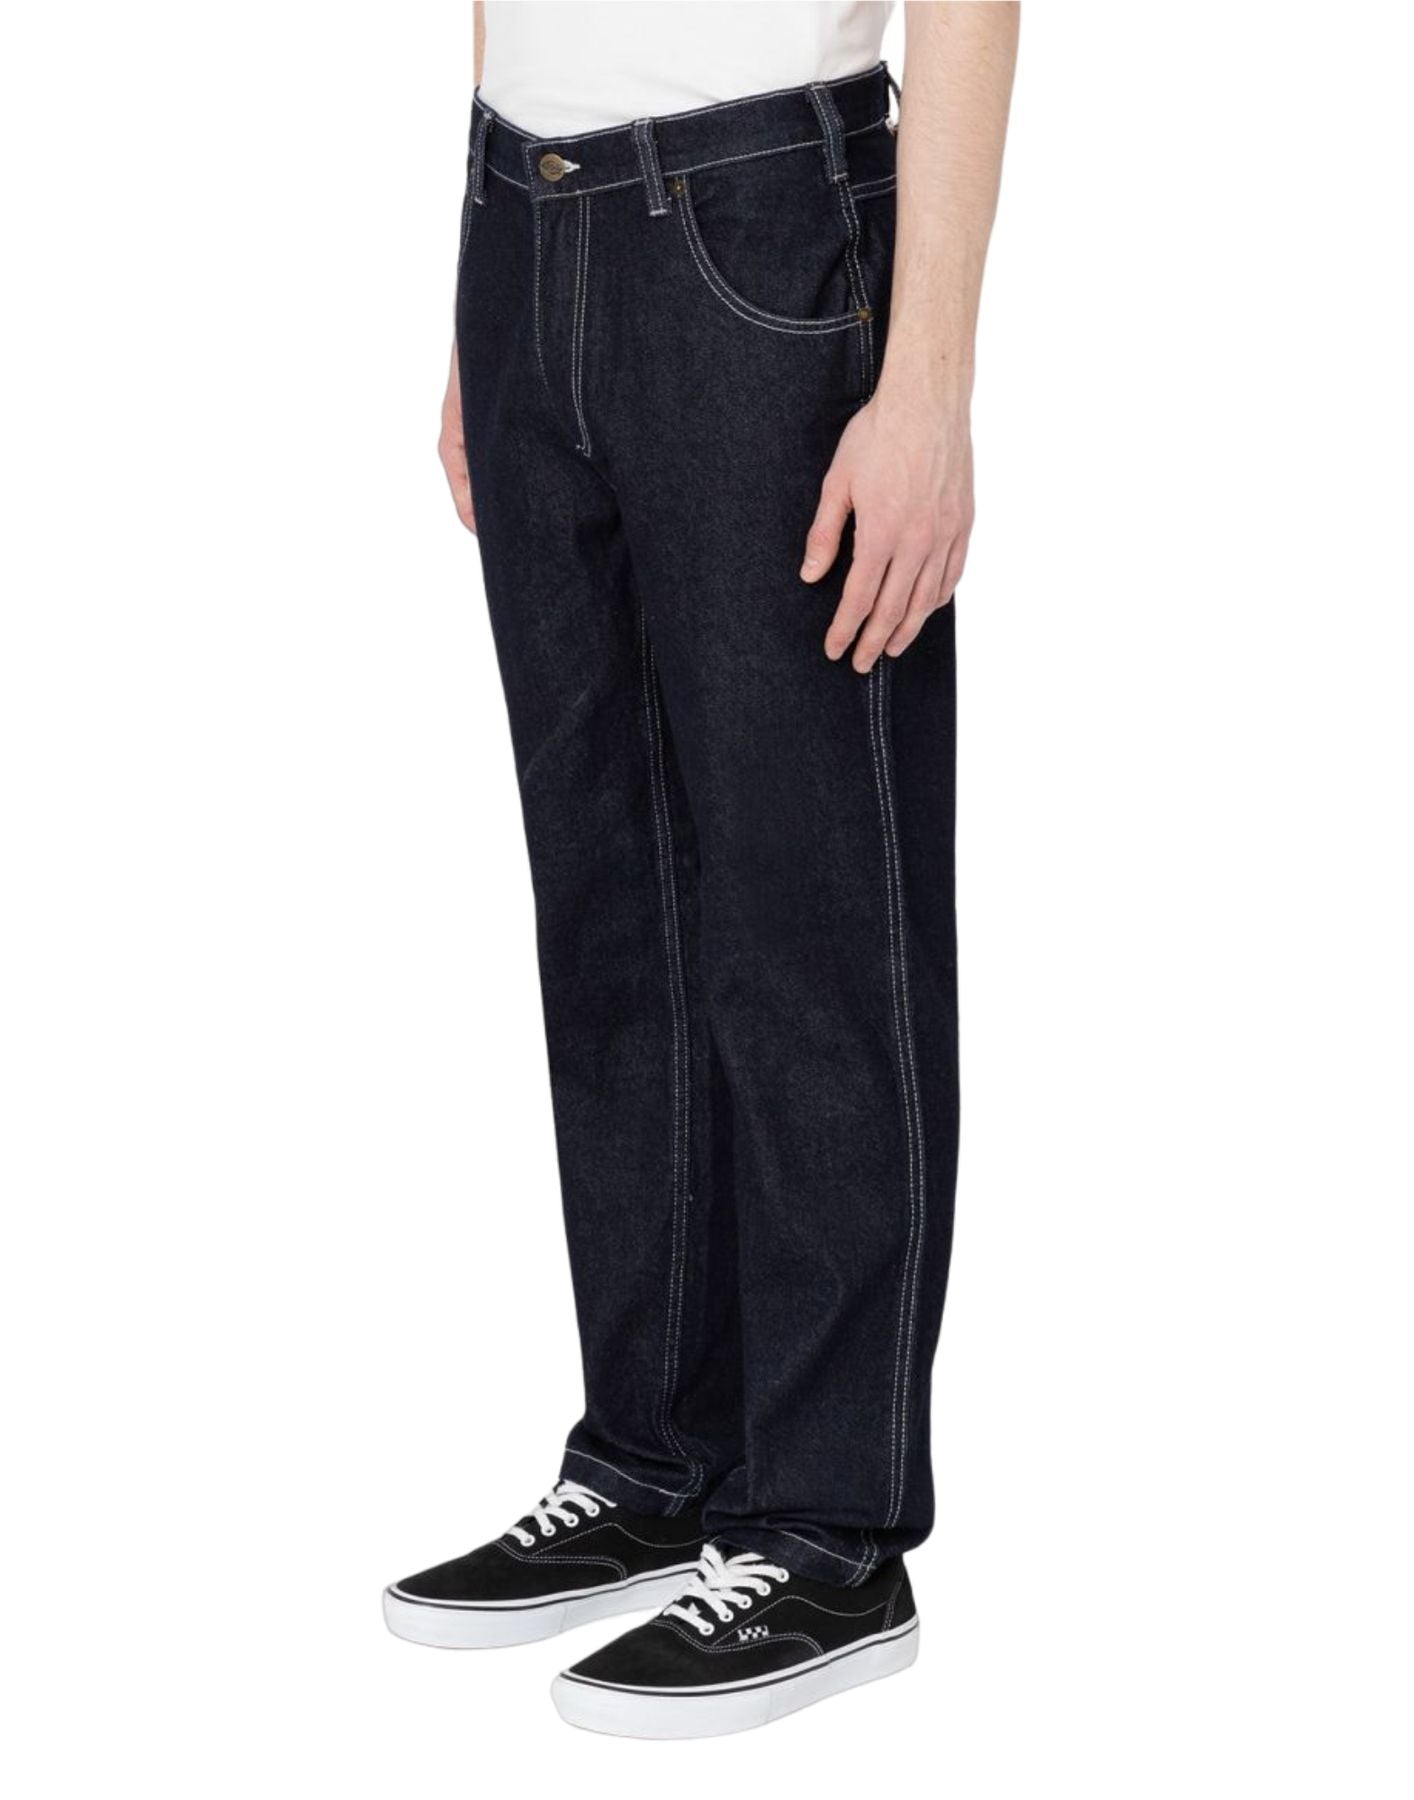 Jeans for man DK0A4XECRIN1 DICKIES